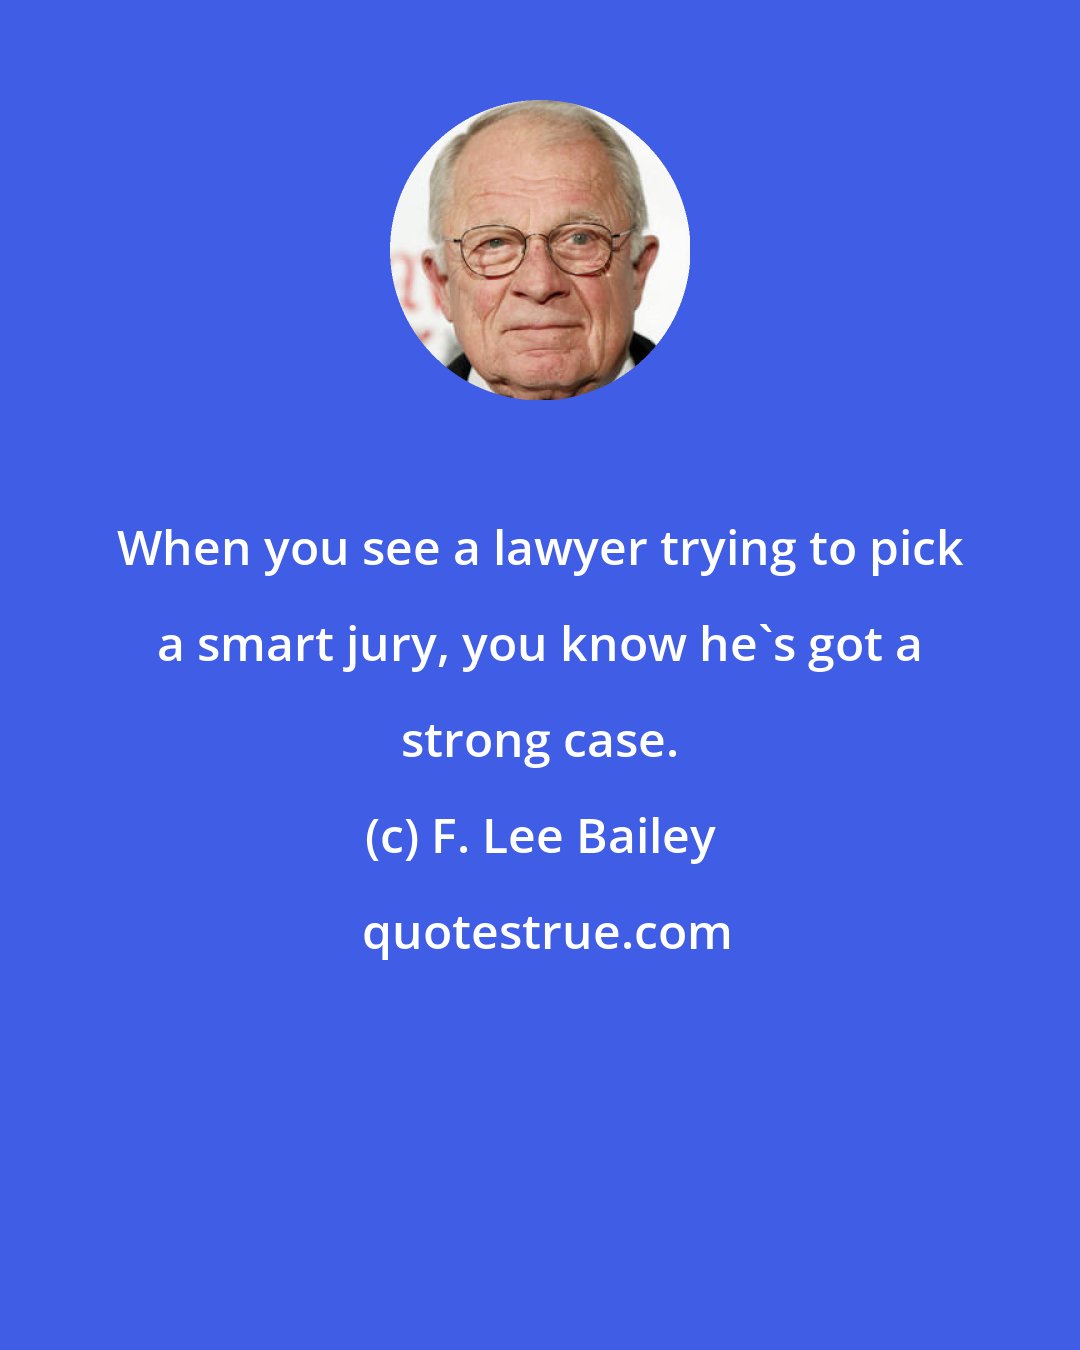 F. Lee Bailey: When you see a lawyer trying to pick a smart jury, you know he's got a strong case.